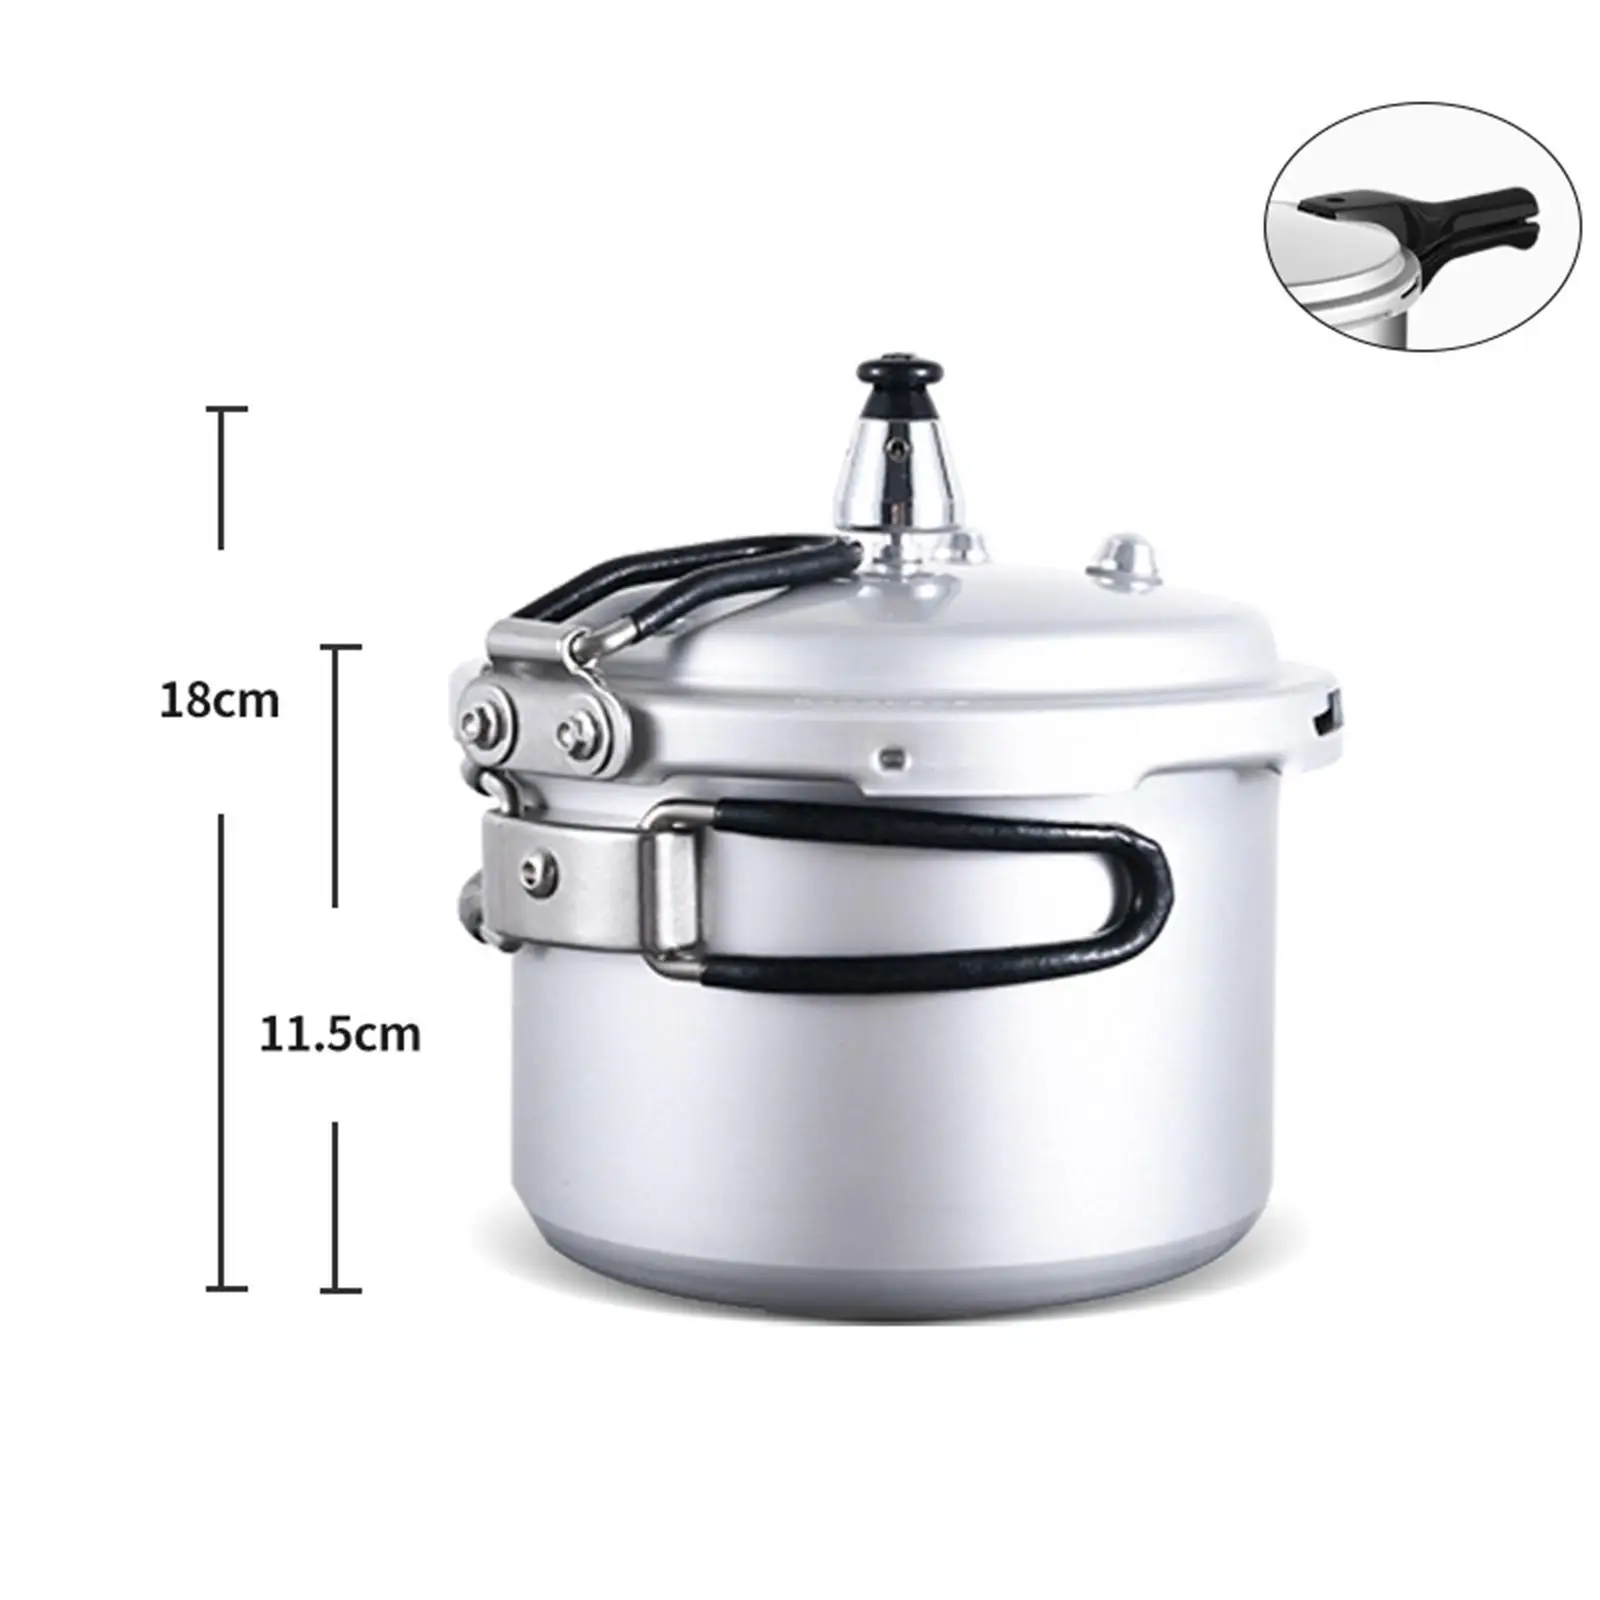 Camping pressure cooker with non-stick coating, for travel in the kitchen